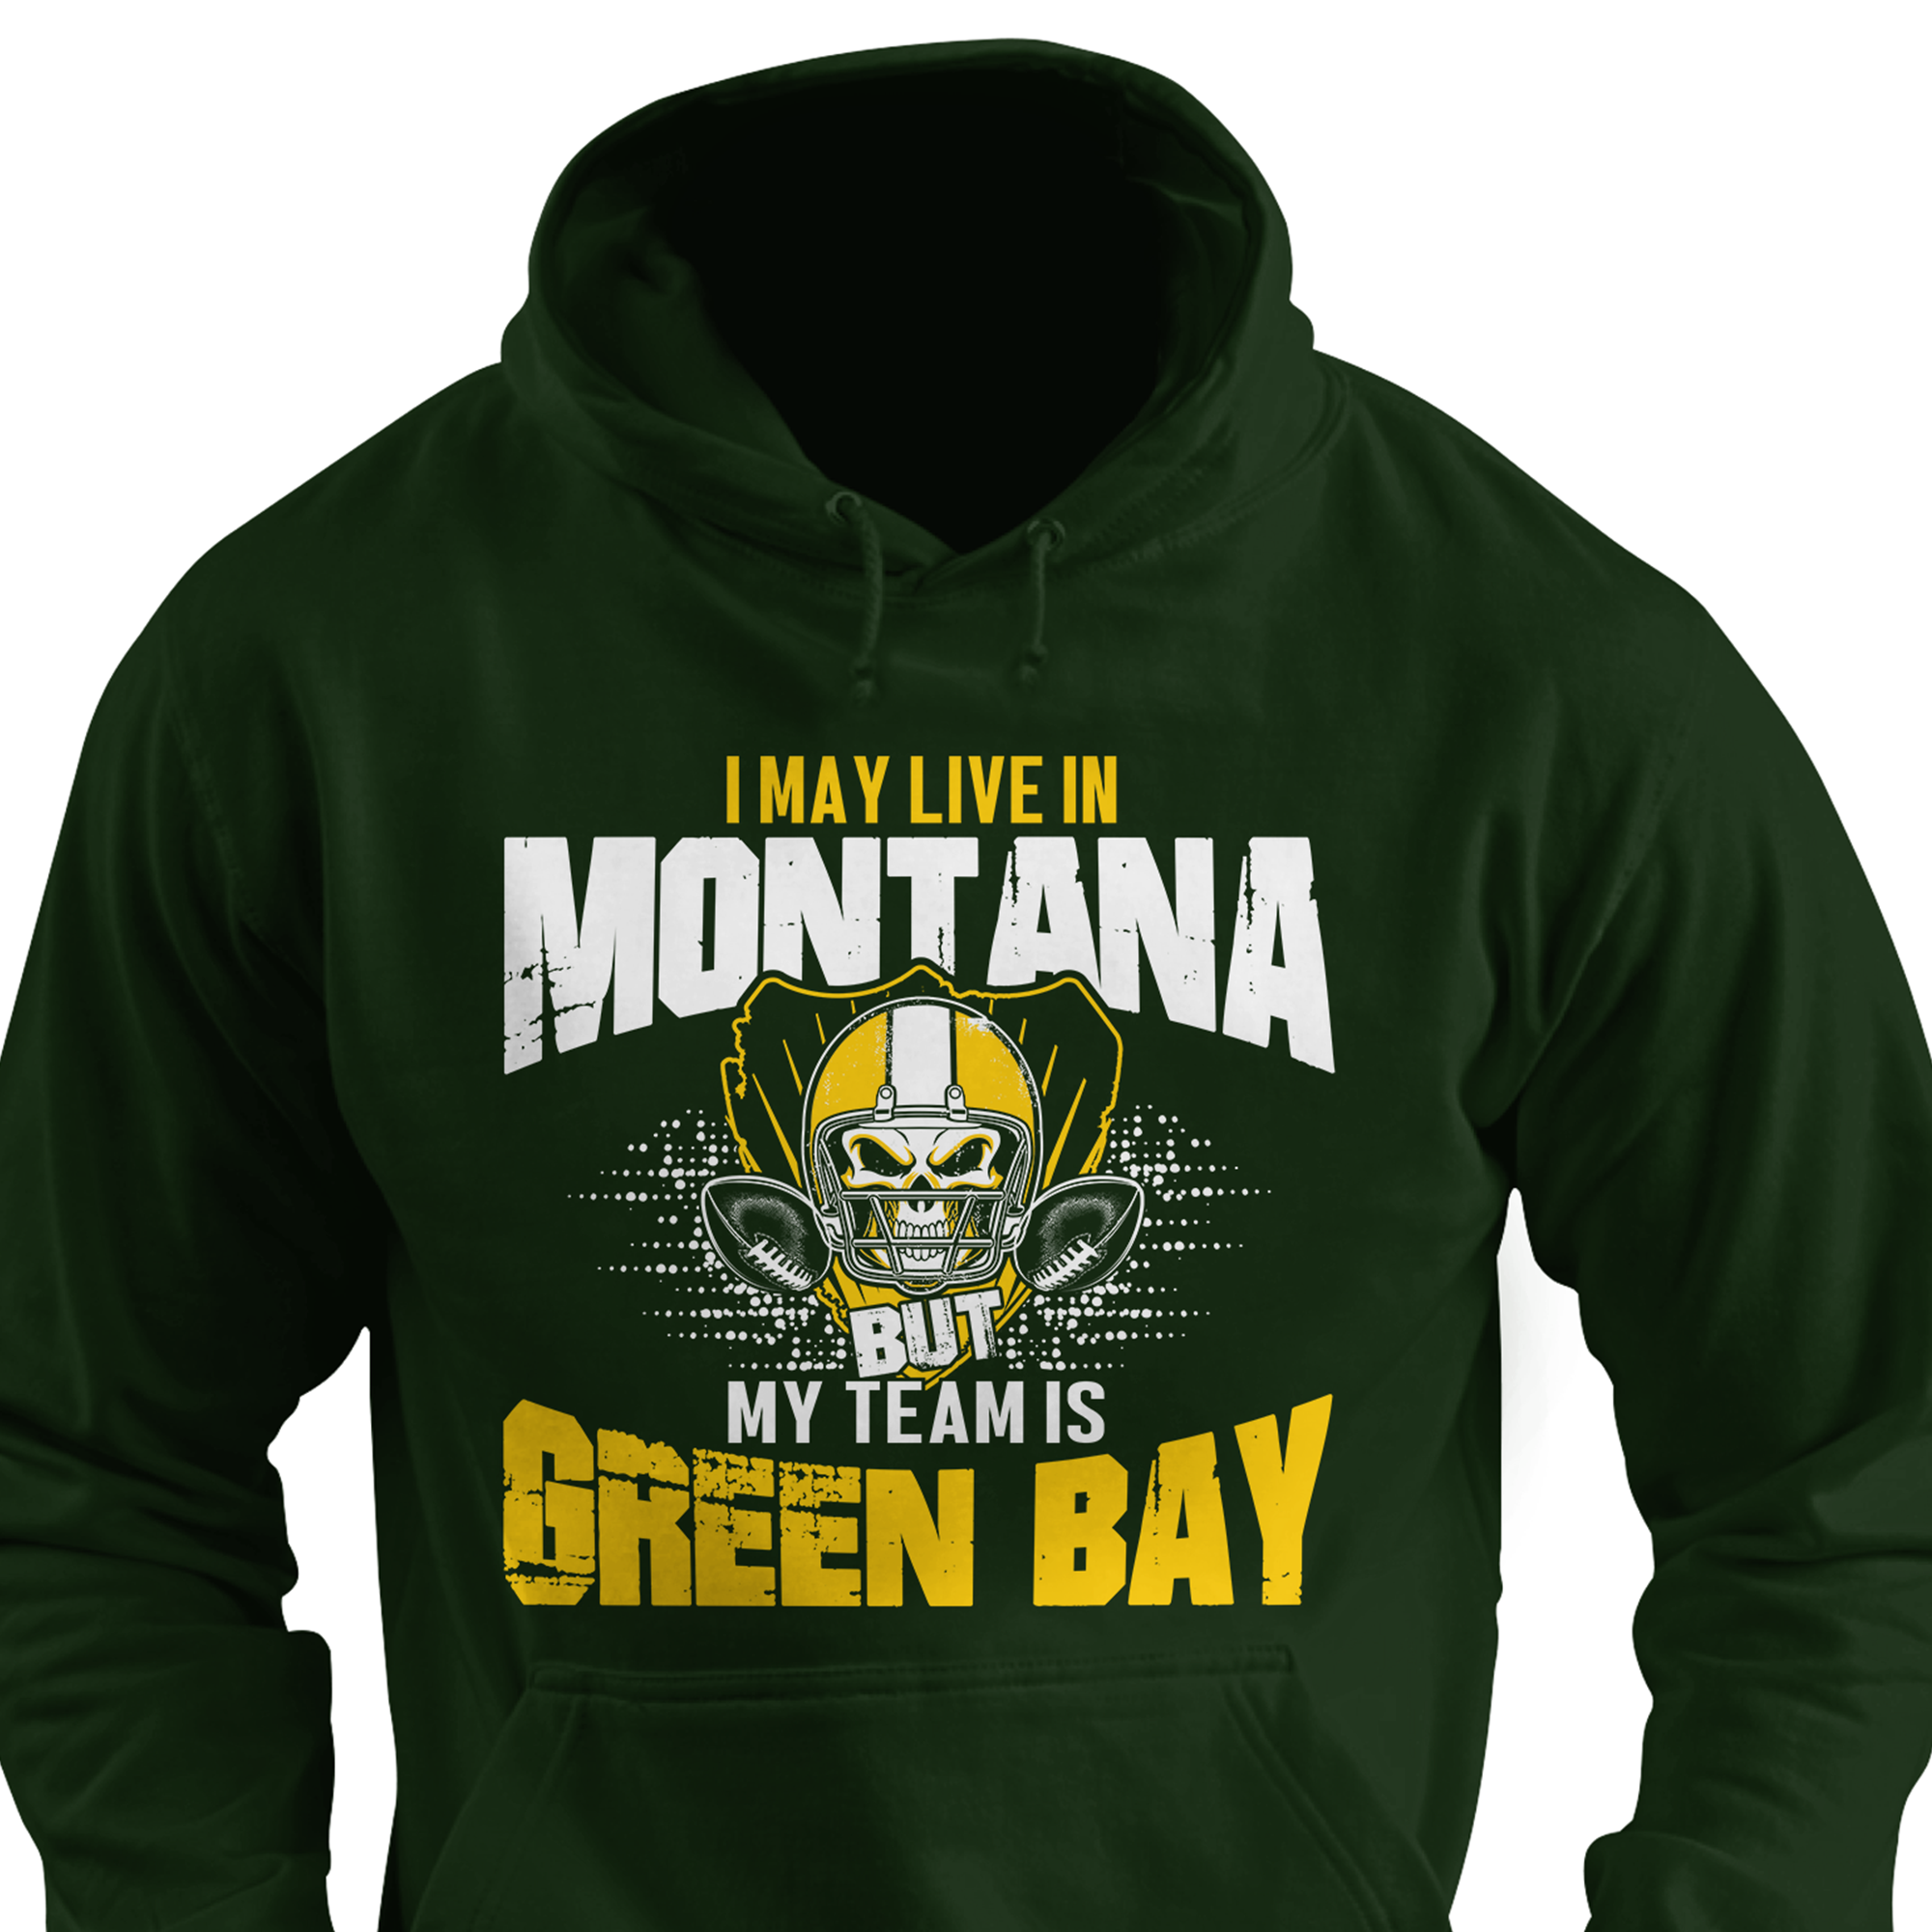 I May Live in Montana but My Team is Green Bay